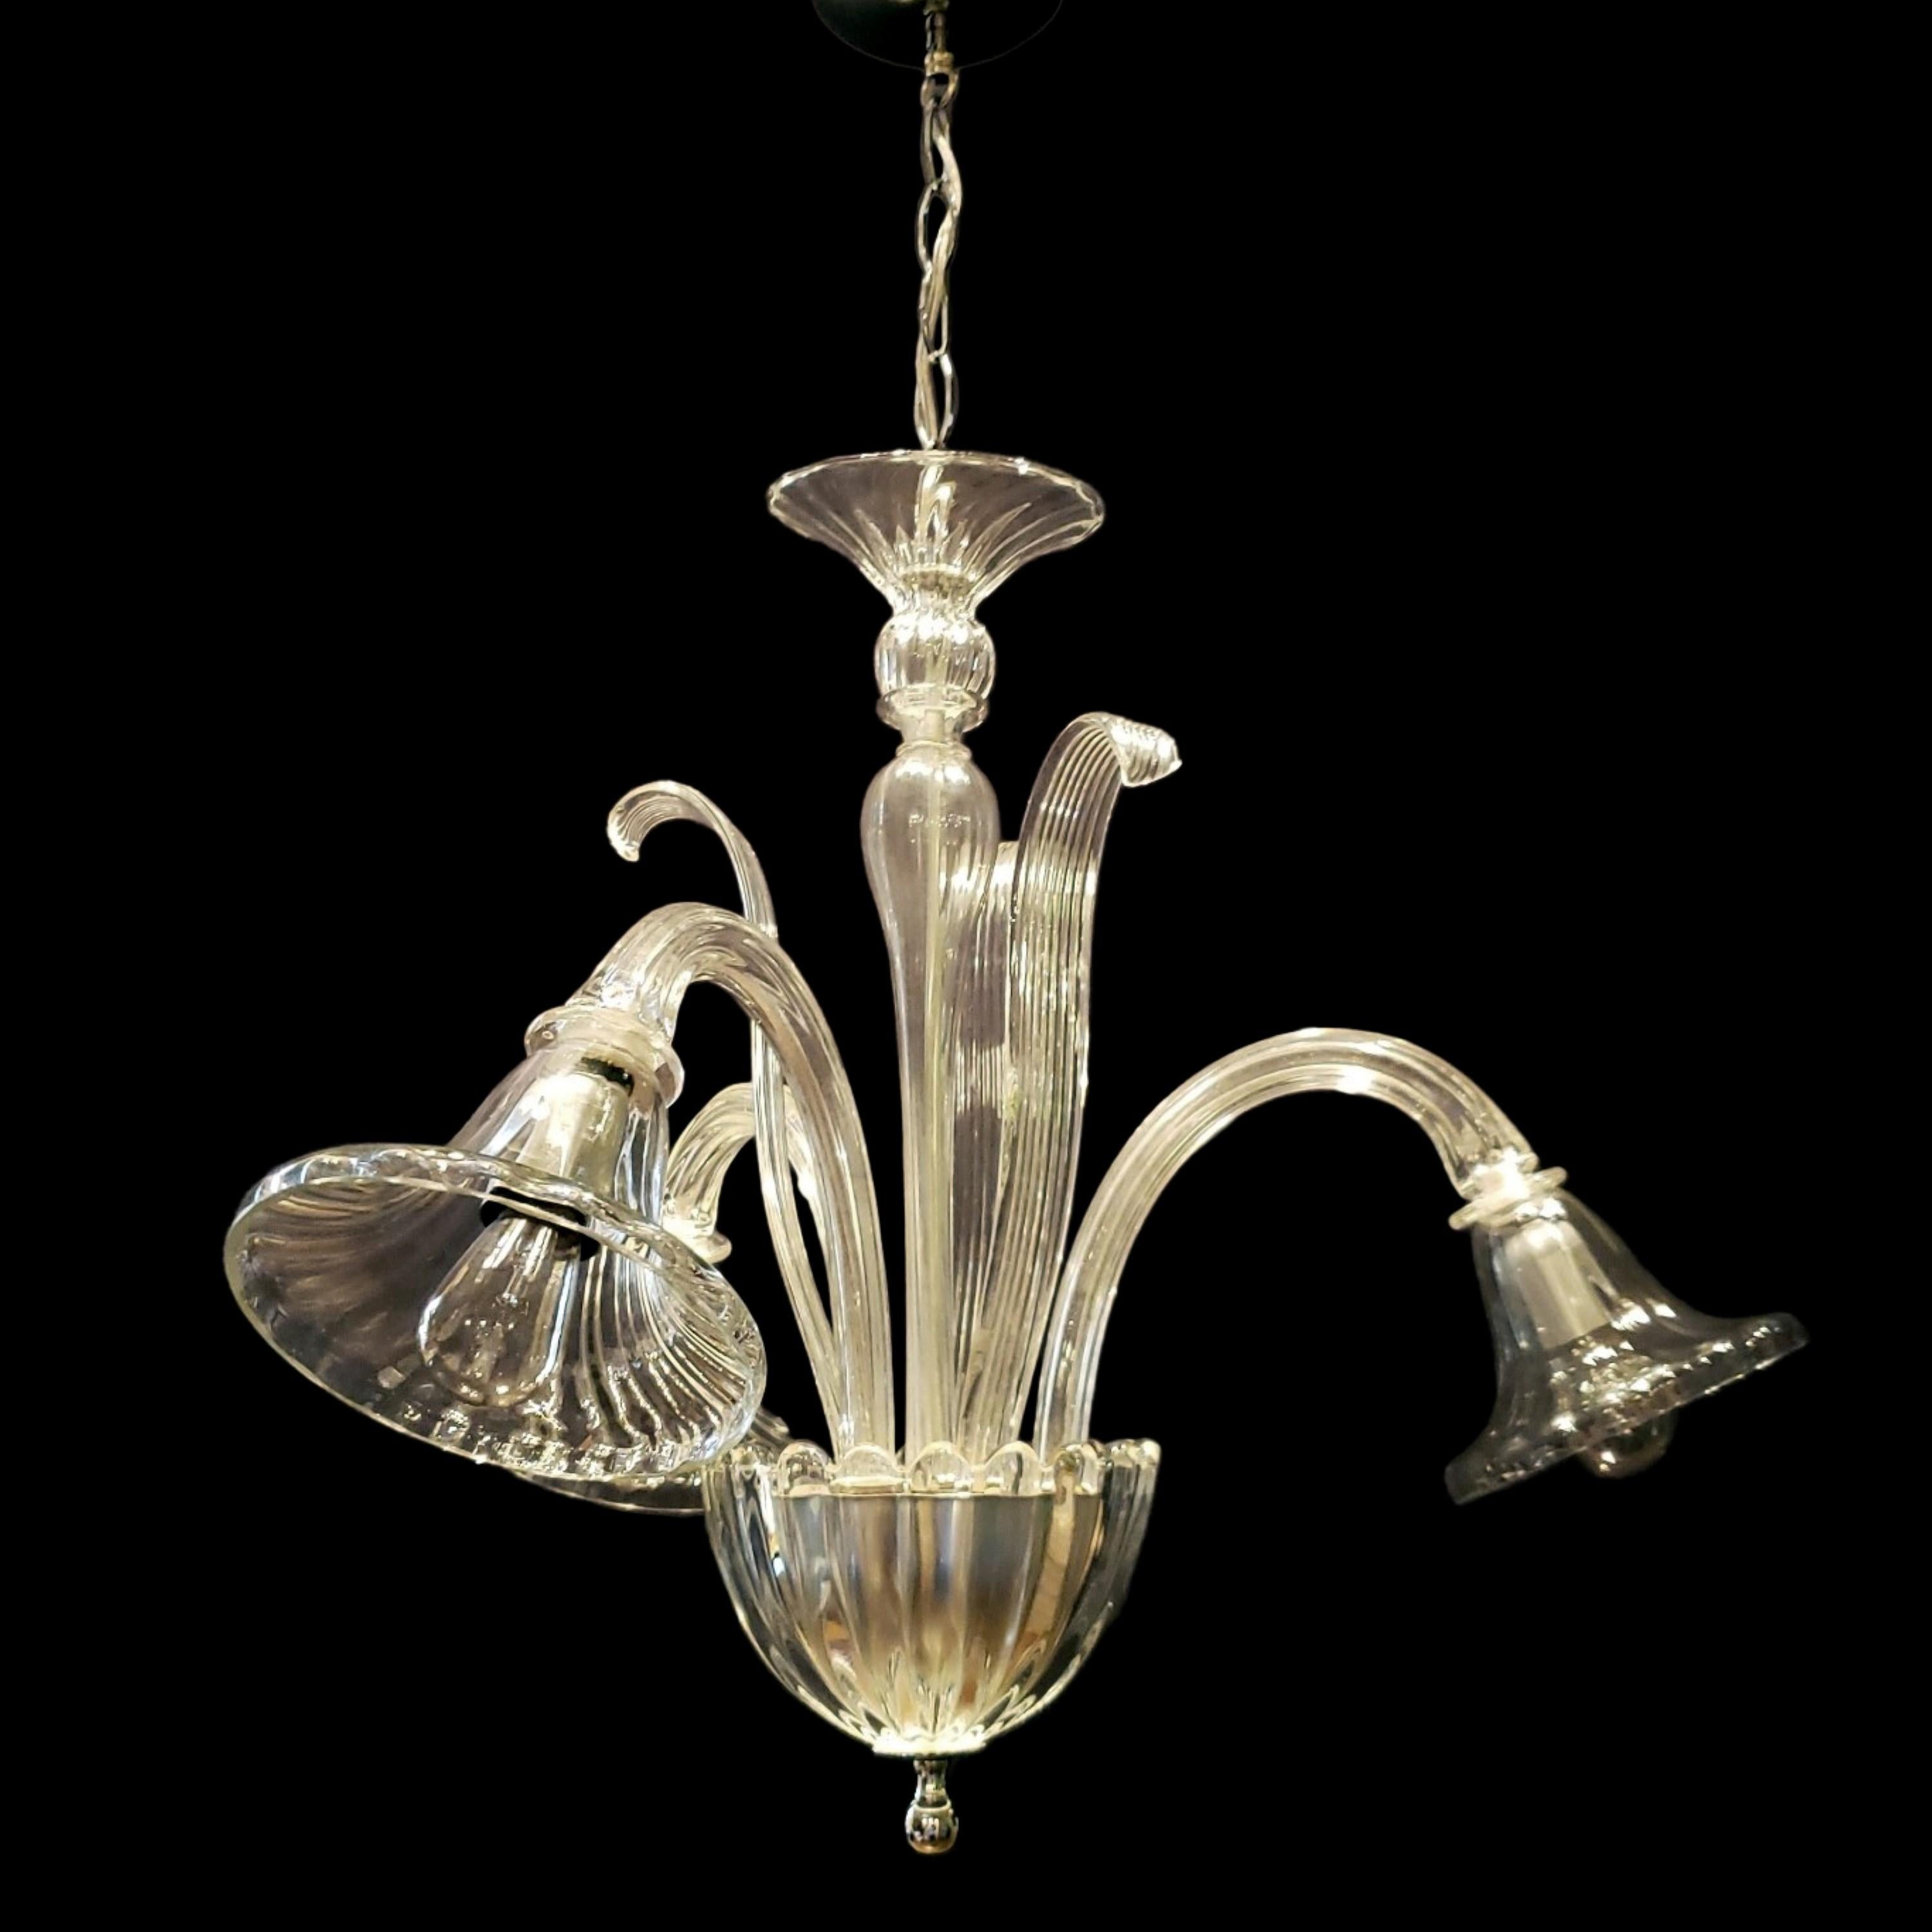 20th Century hand made Murano crystal chandelier with three down lights and upright ribbon leaves. This comes rewired and ready to install. Ships disassembled.  Cleaned and restored. Please note, this item is located in our Scranton, PA location.